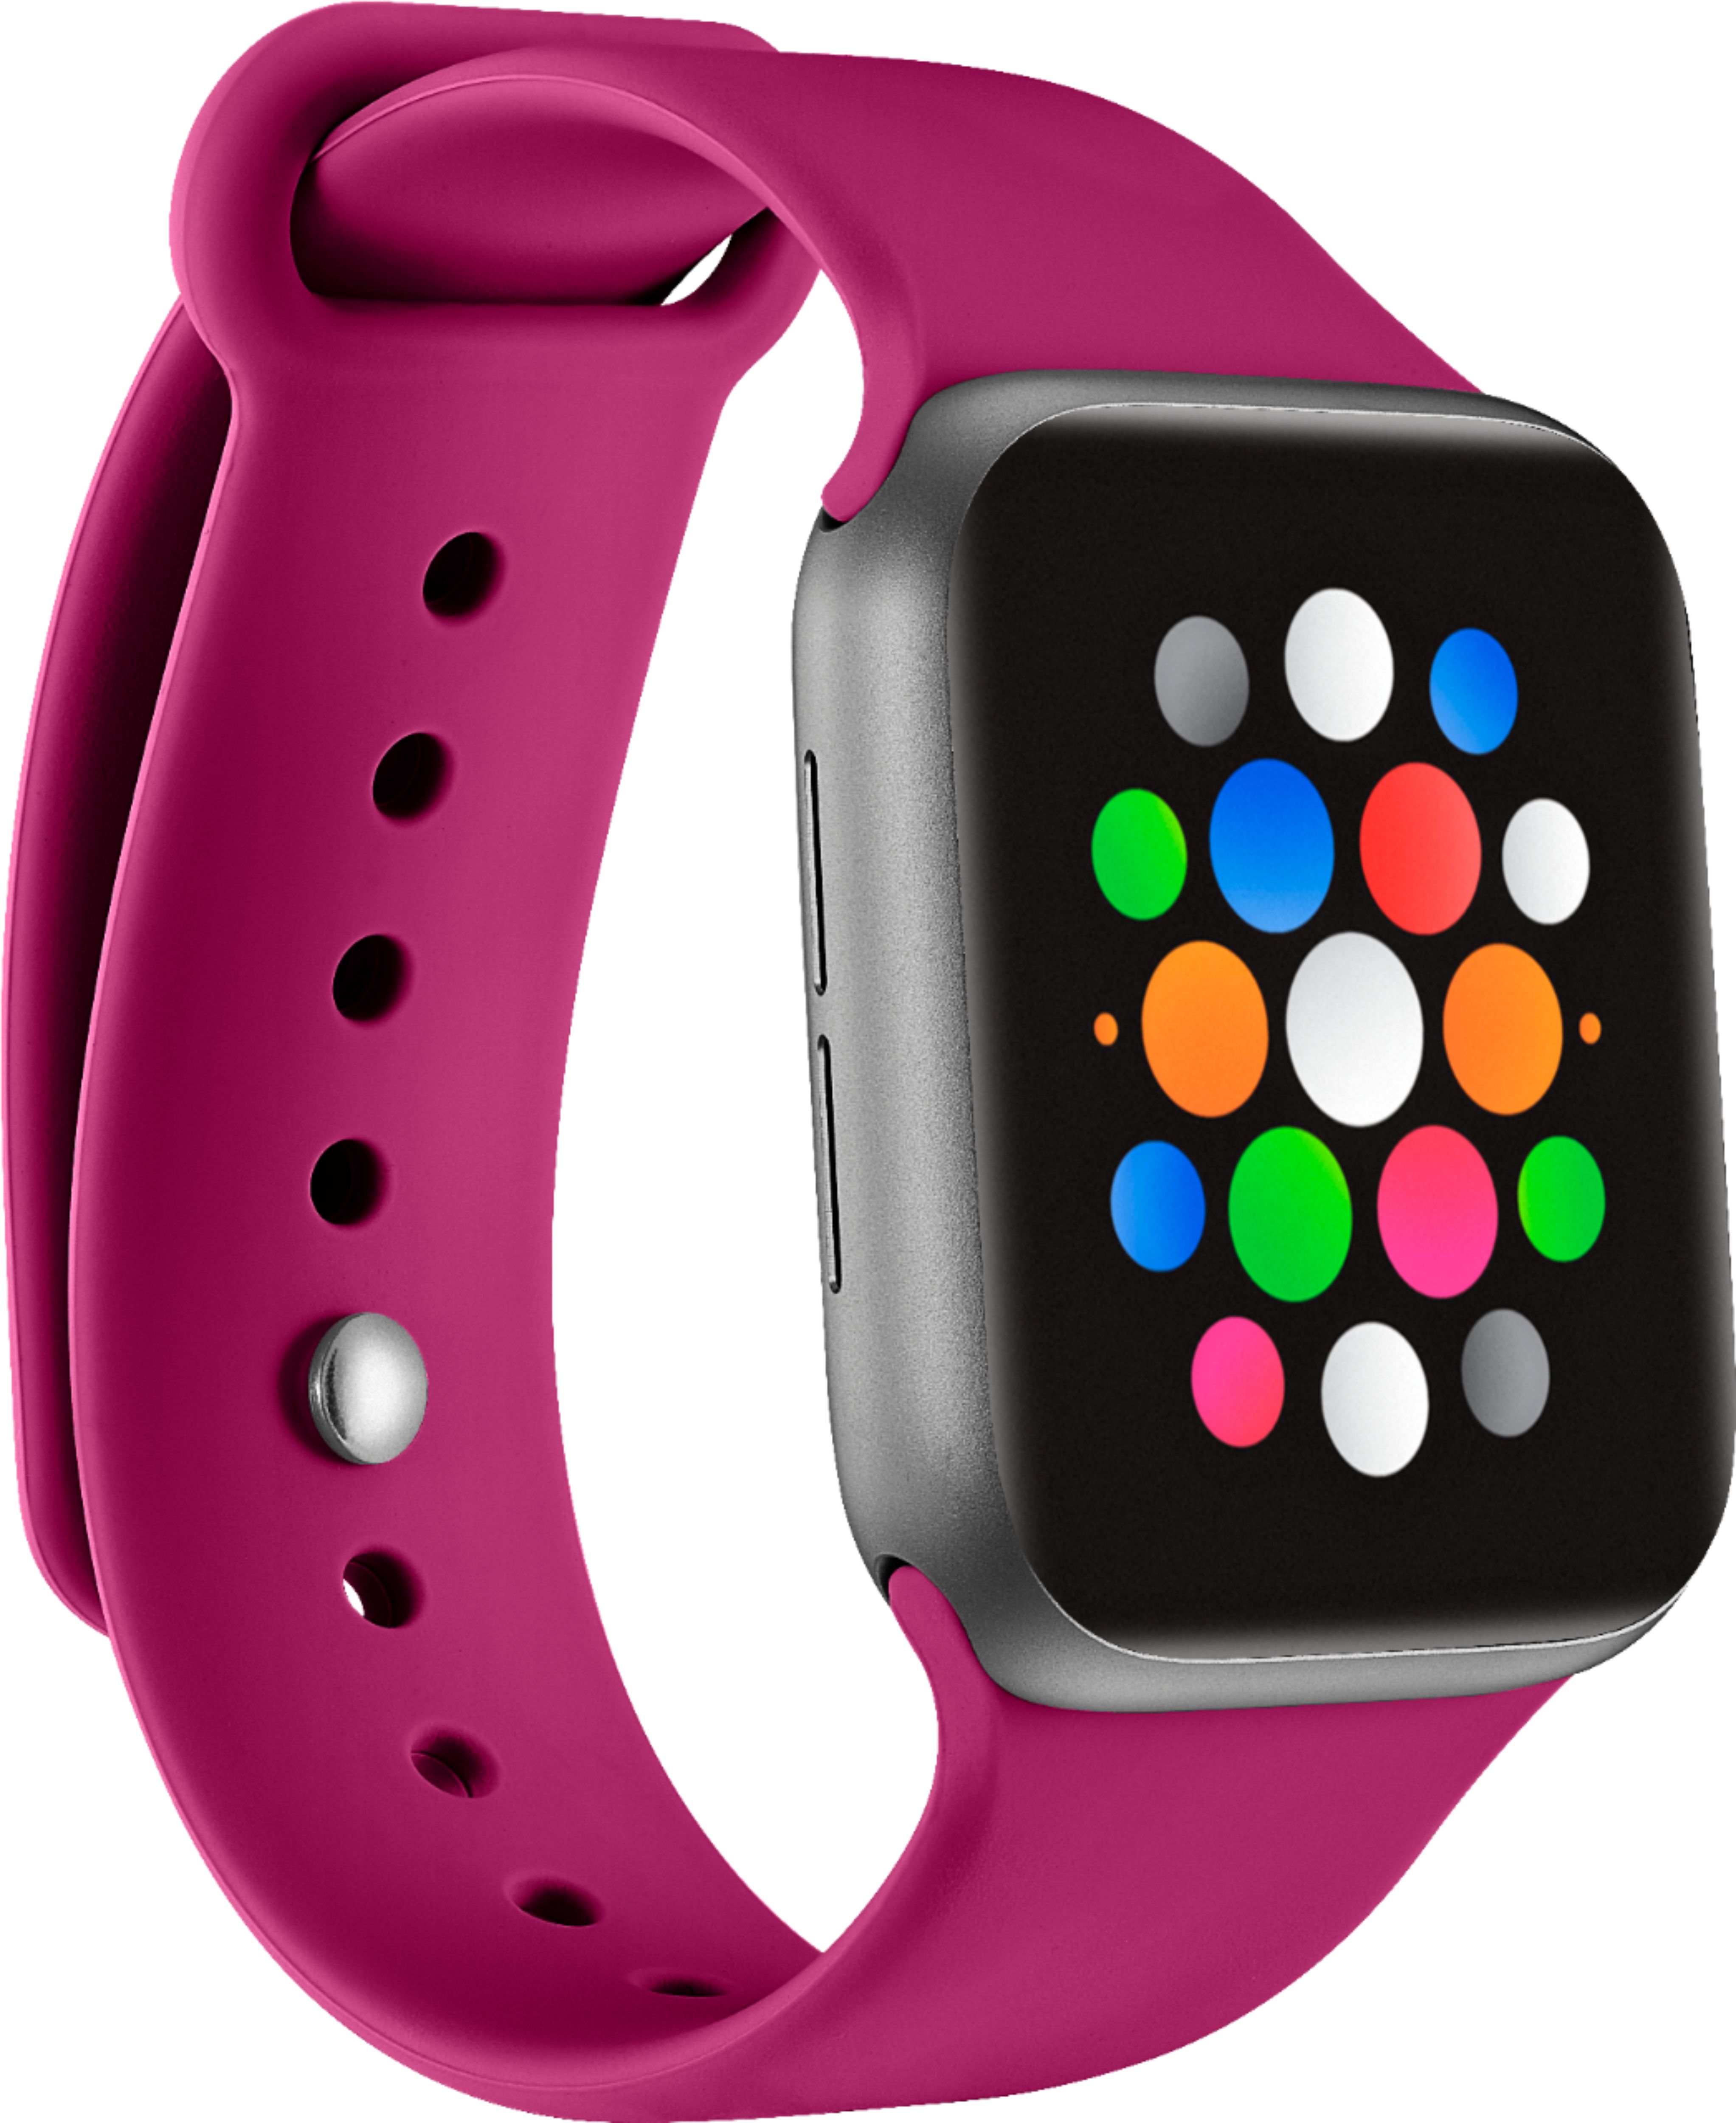 Solid Color Silicone Band For Apple Watch Multiple Colors Available -  38mm/40mm/41mm (S/M) 5.1-7.1 Wrist / Barbie Pink